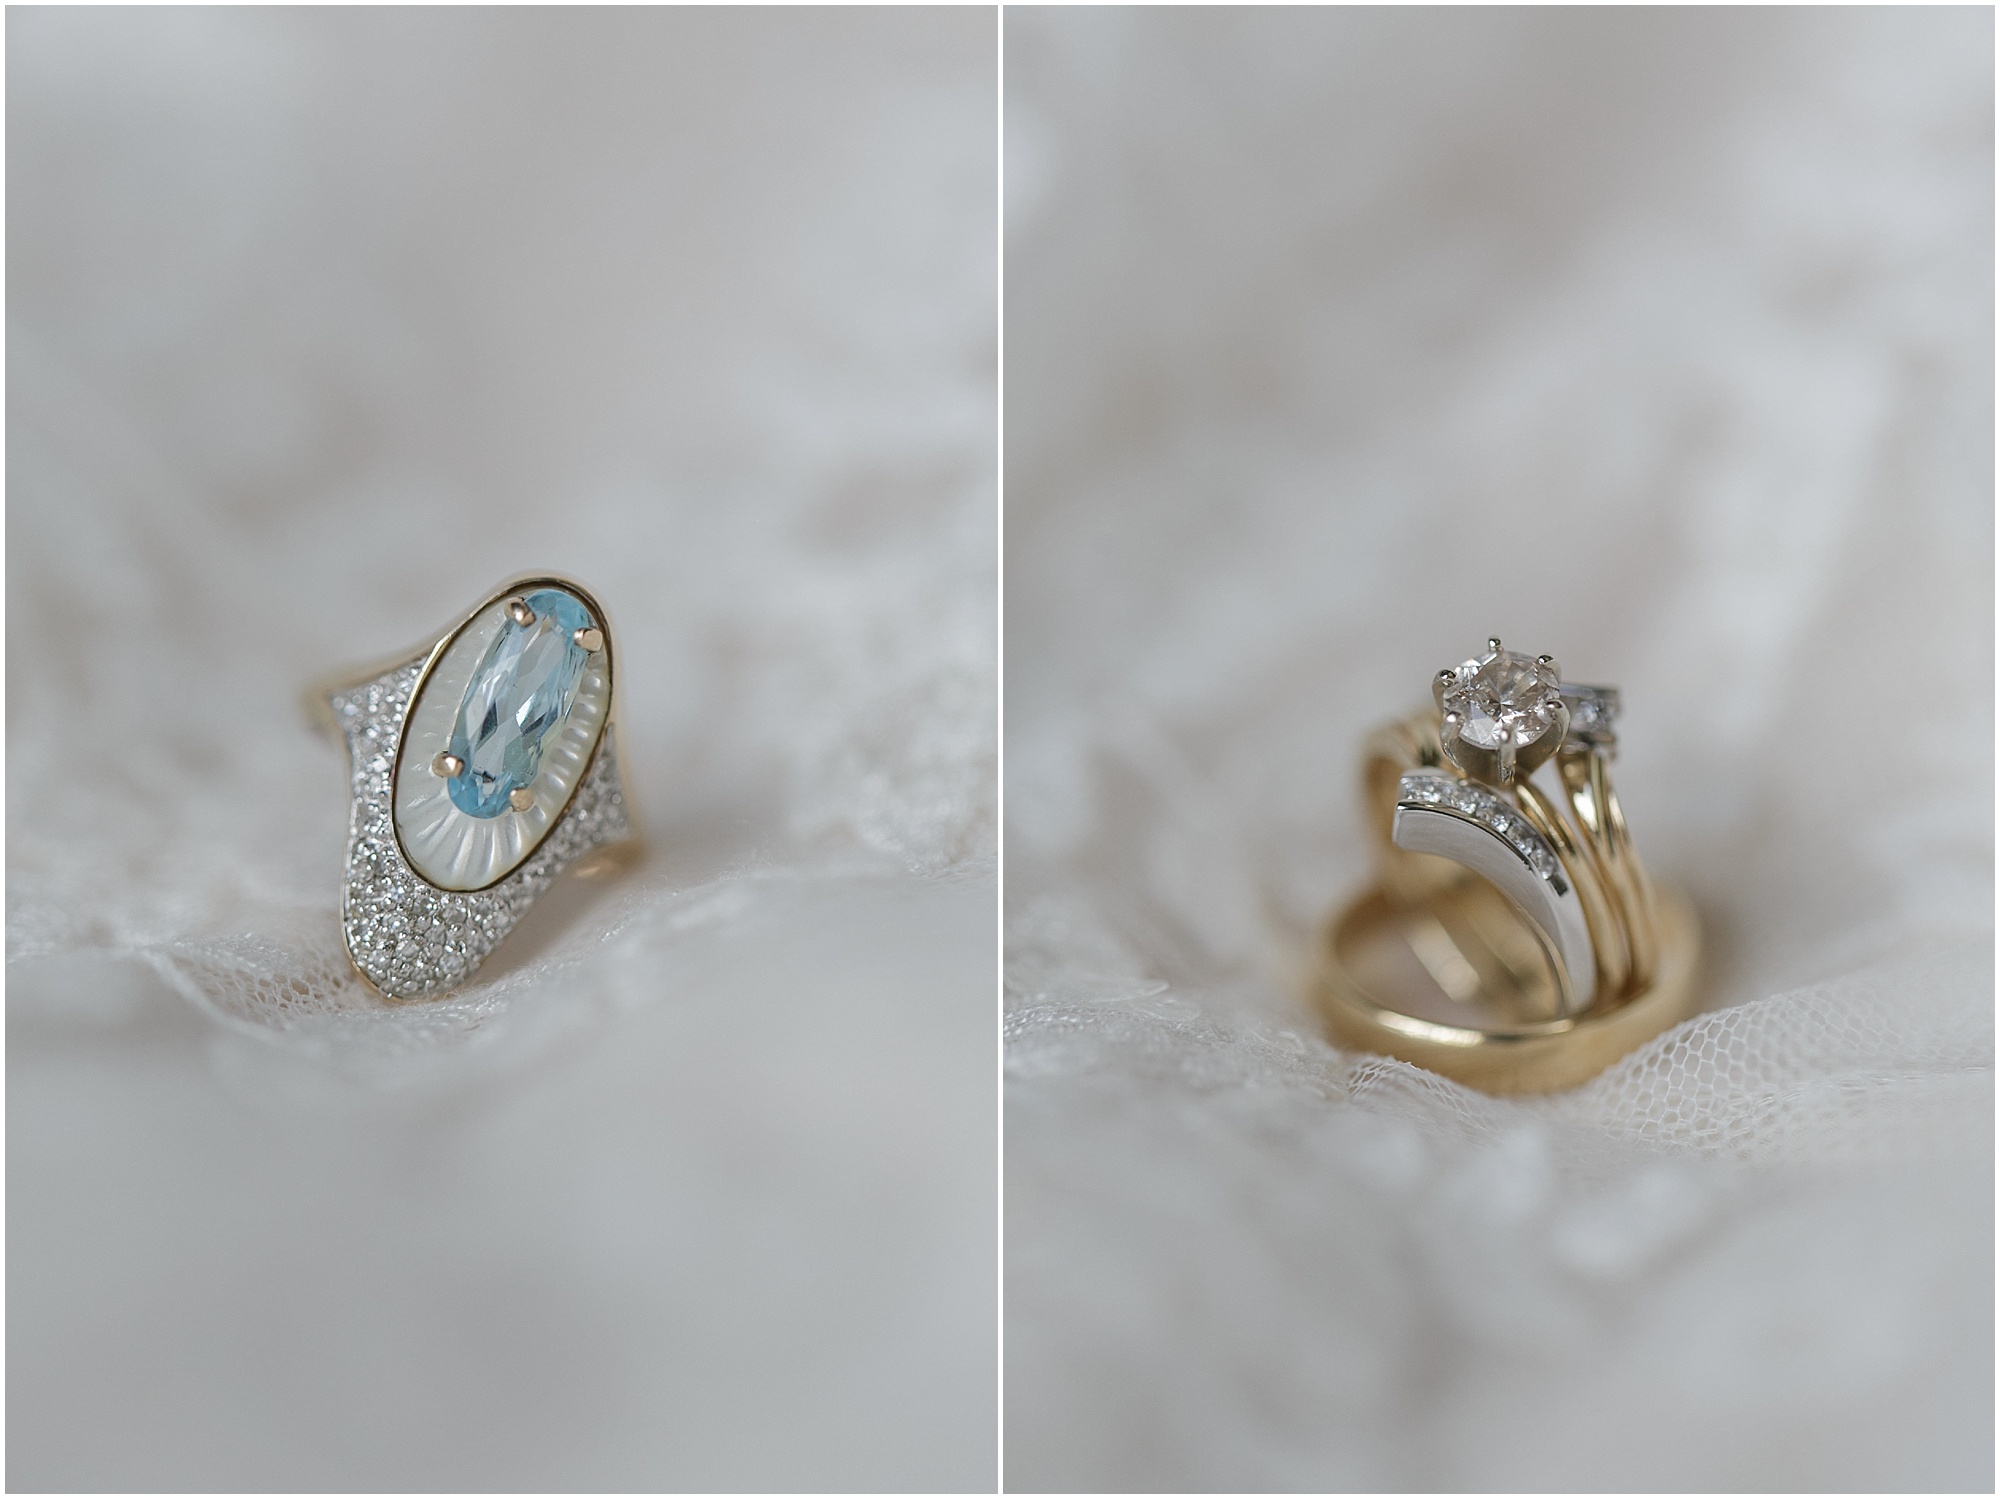 An antique blue ring and gold weddings rings. 